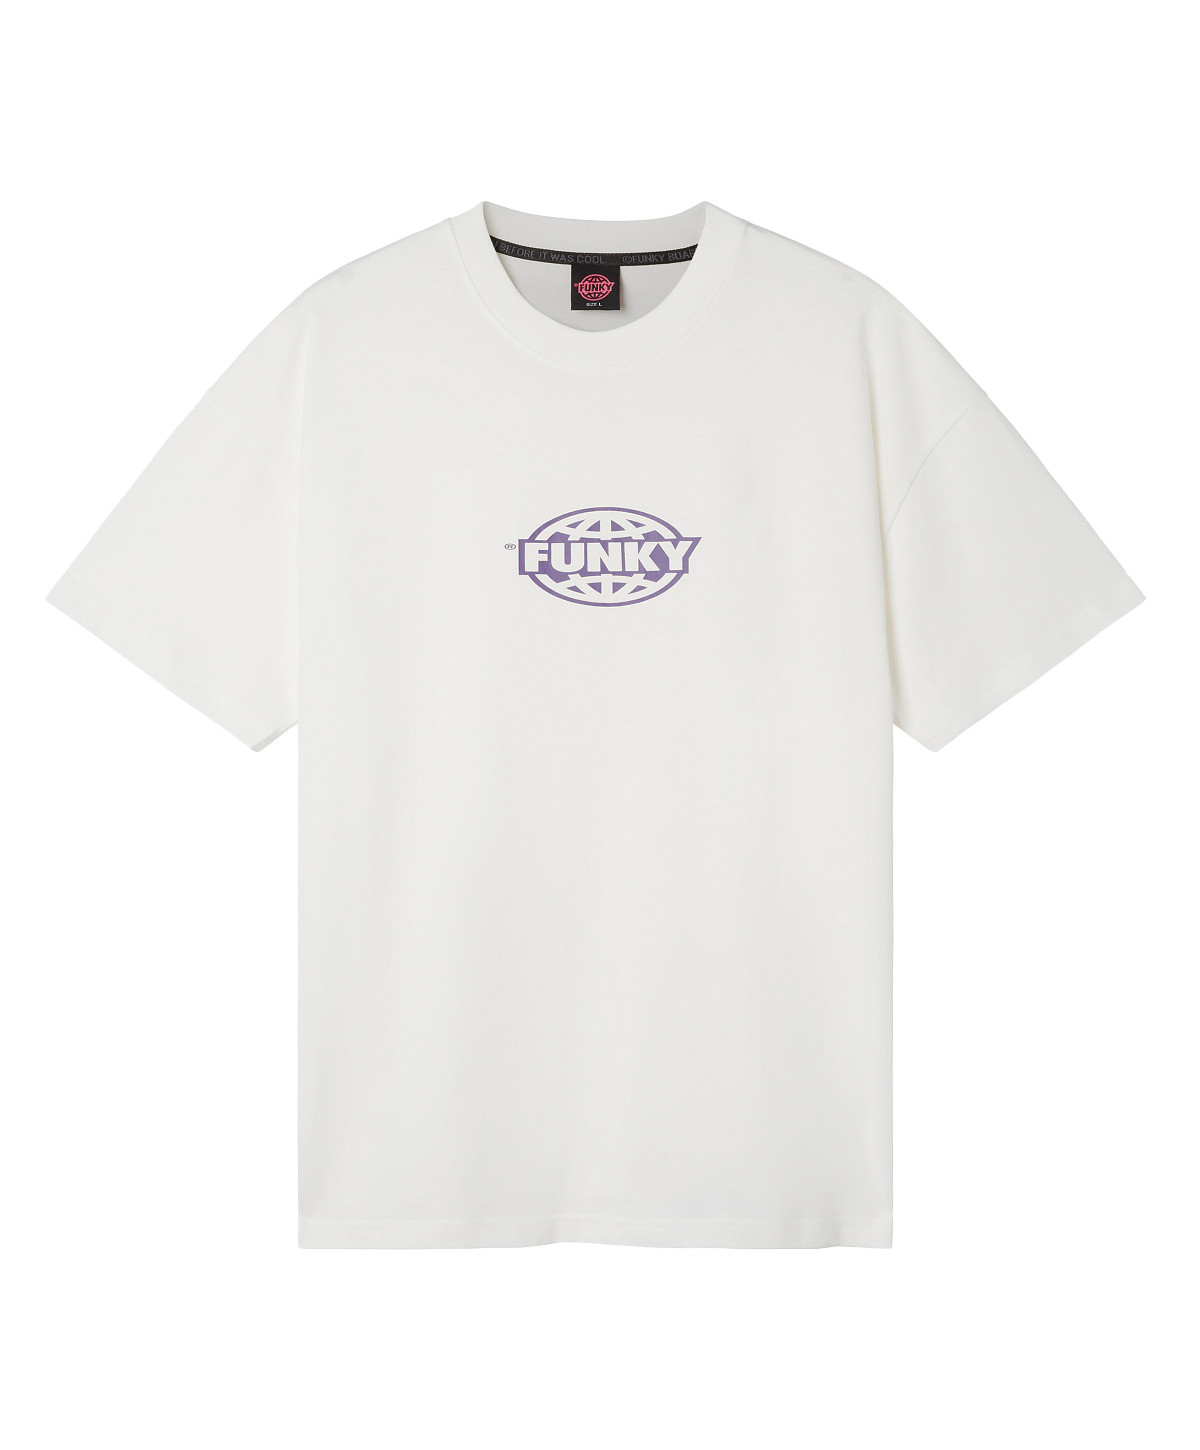 Funky - Crew-neck T-shirt with oval logo, White, large image number 0